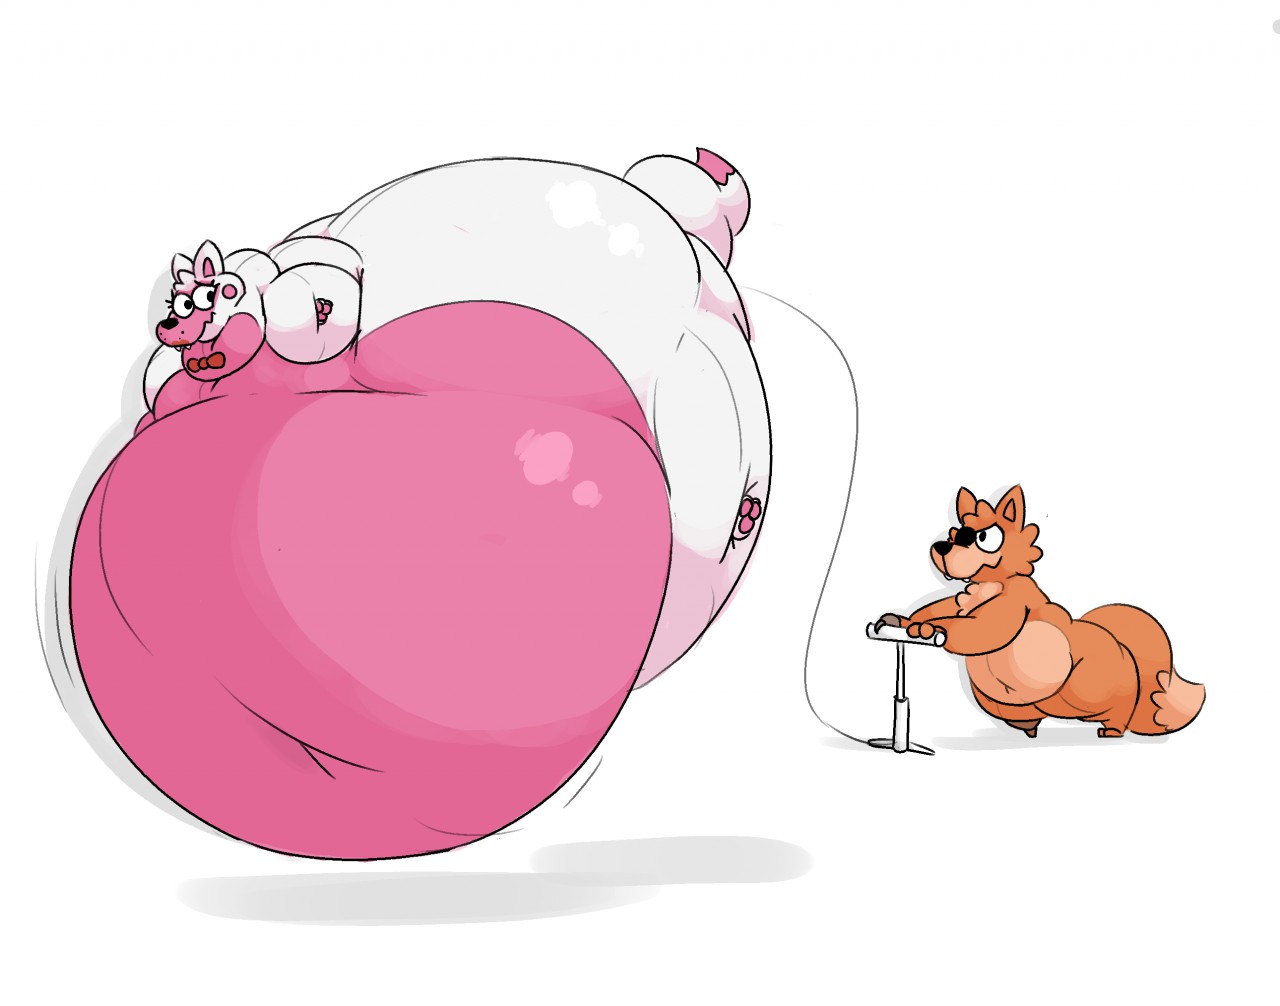 Foxy inflation